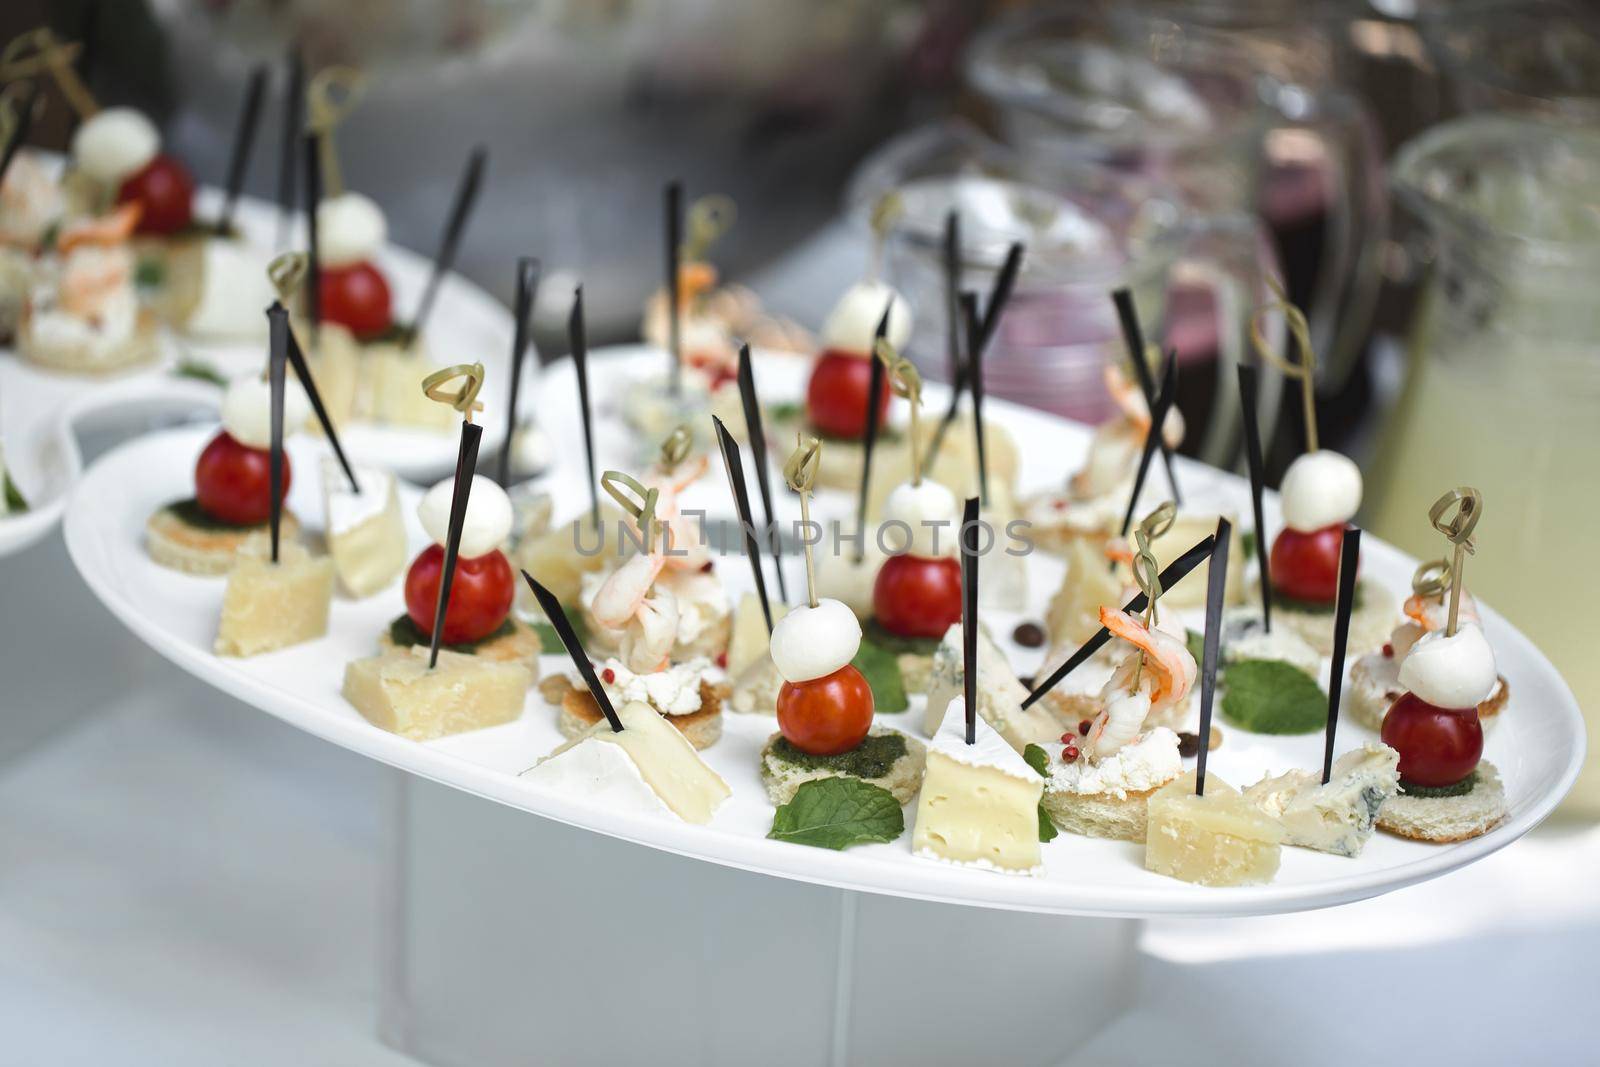 Catering table buffet dinner, beautifully decorated banquet with variety of different food snacks and appetizers on corporate birthday party event or wedding reception, canape, delicatessen setting